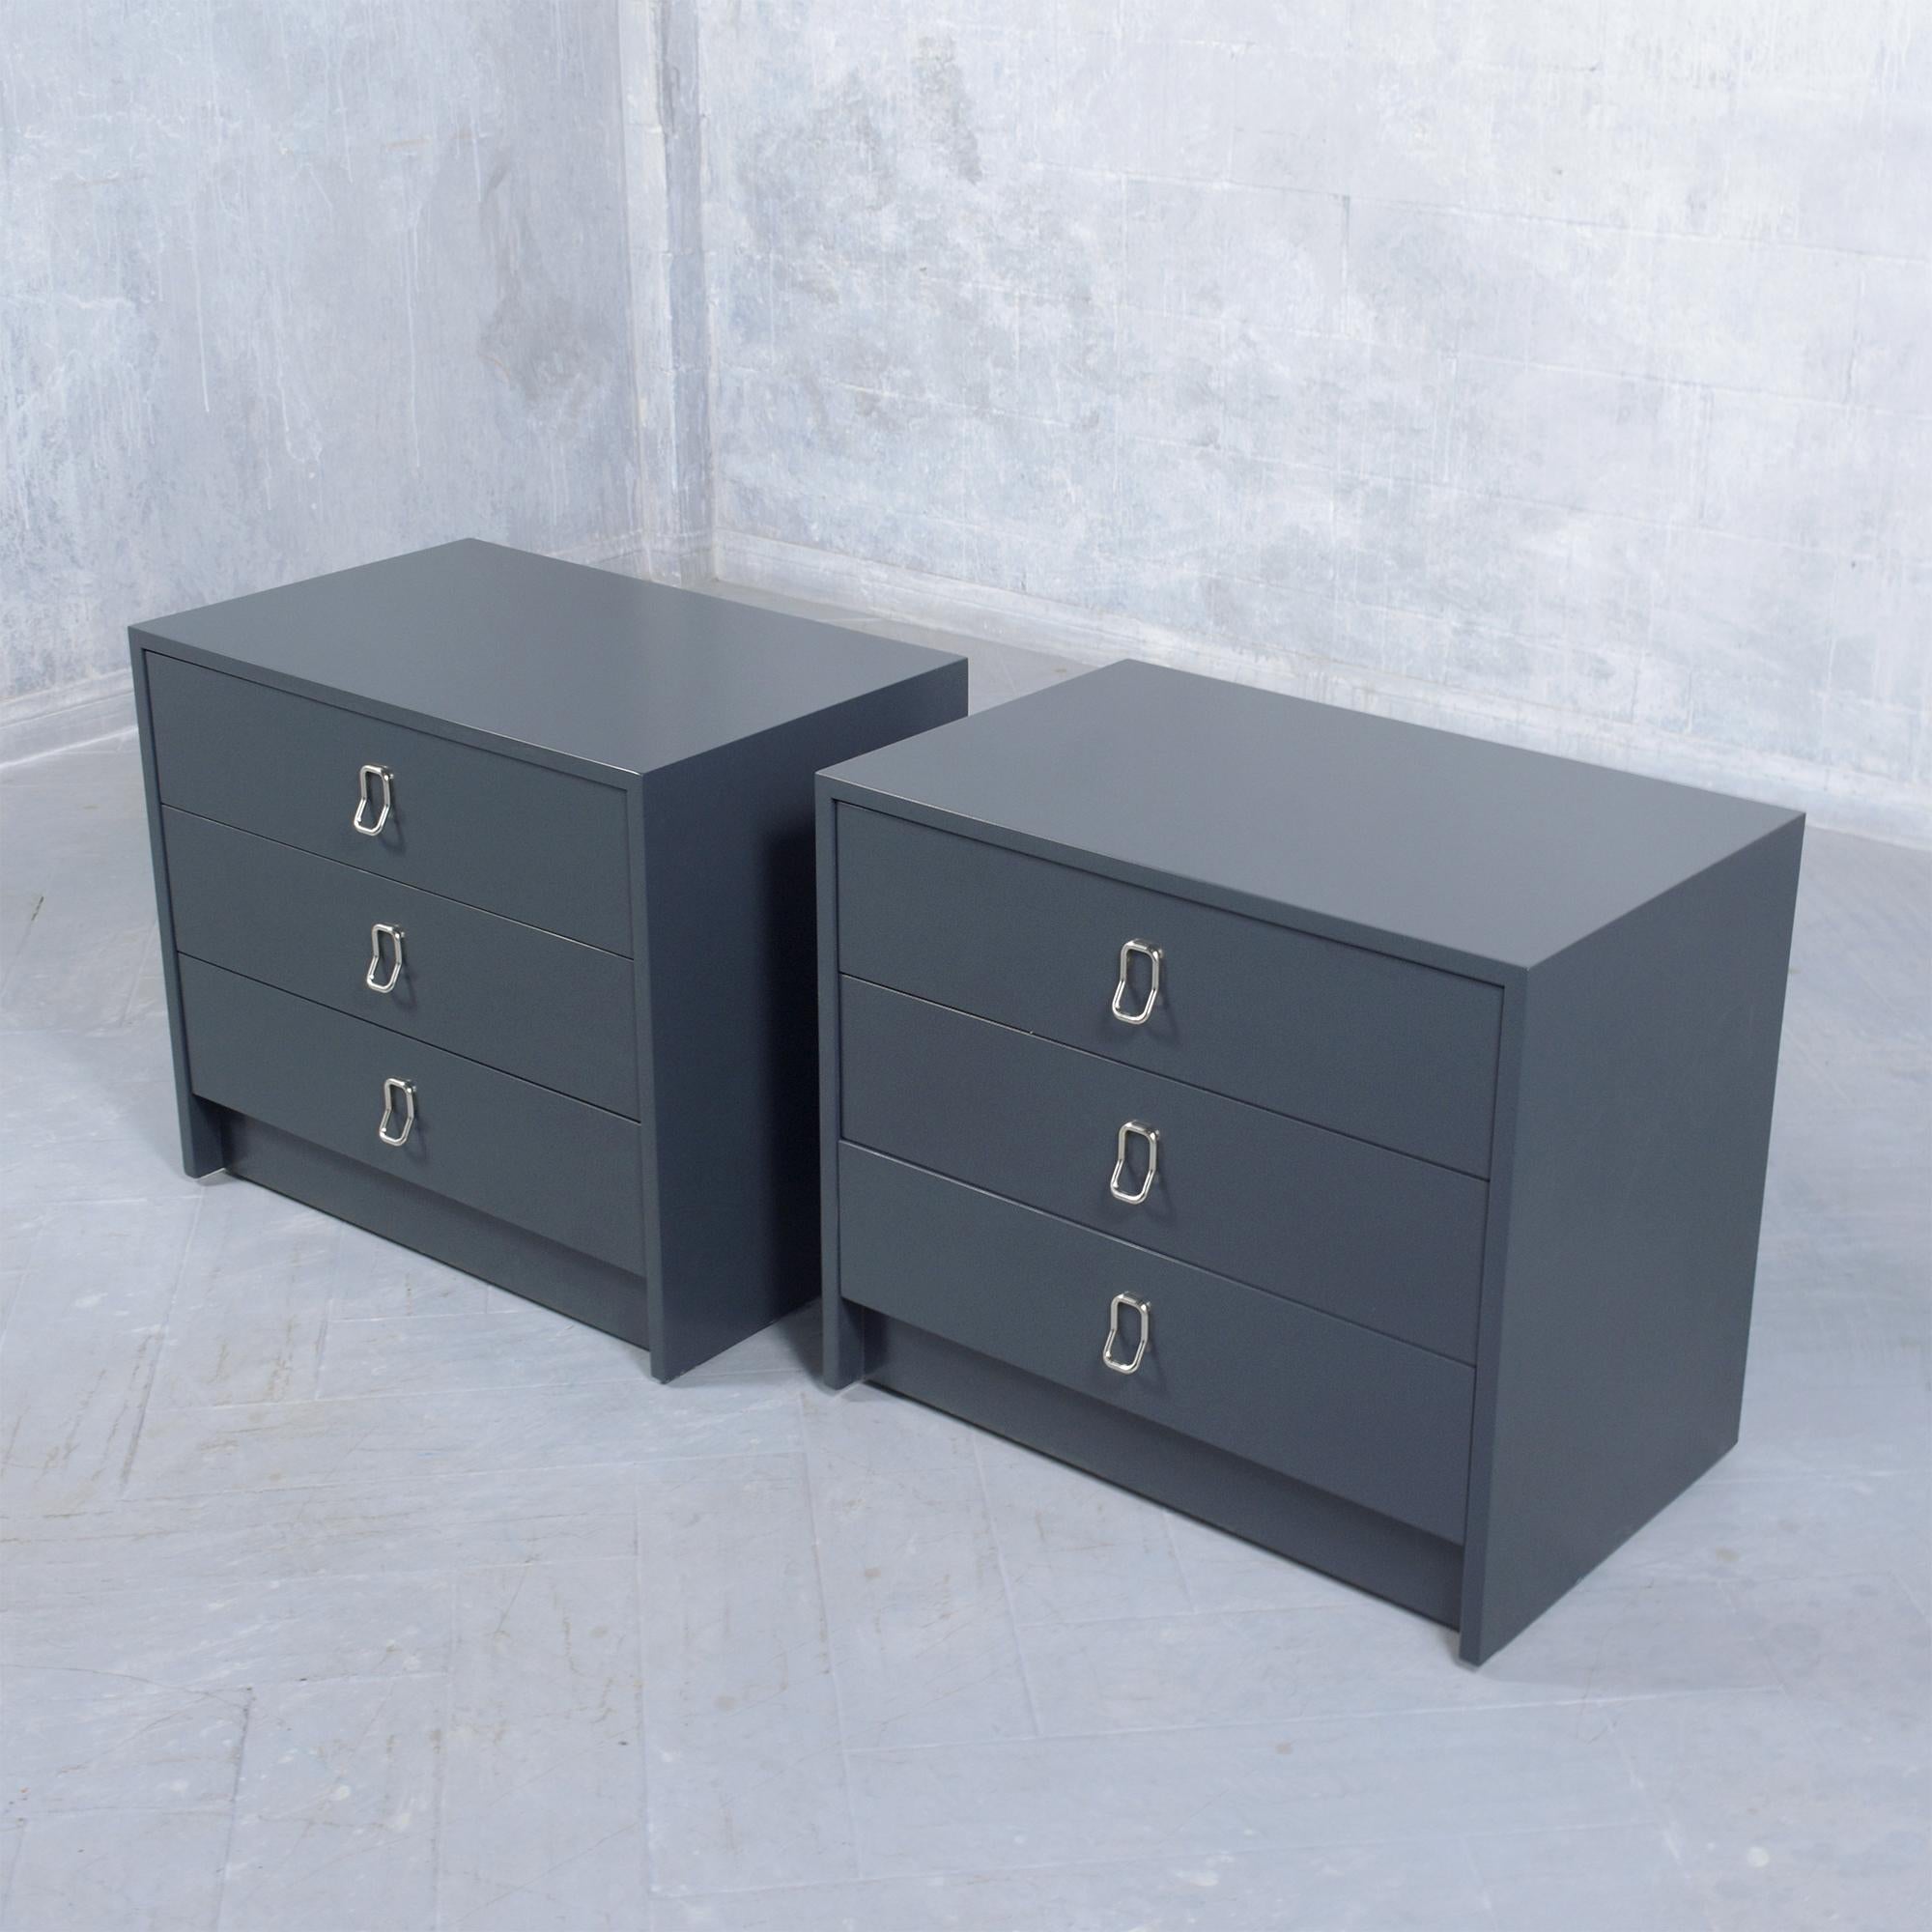 Step into the stylish world of the 1960s with this extraordinary pair of mid-century nightstands by Thayer Coggin, designed by the iconic Milo Baughman. Beautifully handcrafted and in exceptional condition, these nightstands have been meticulously